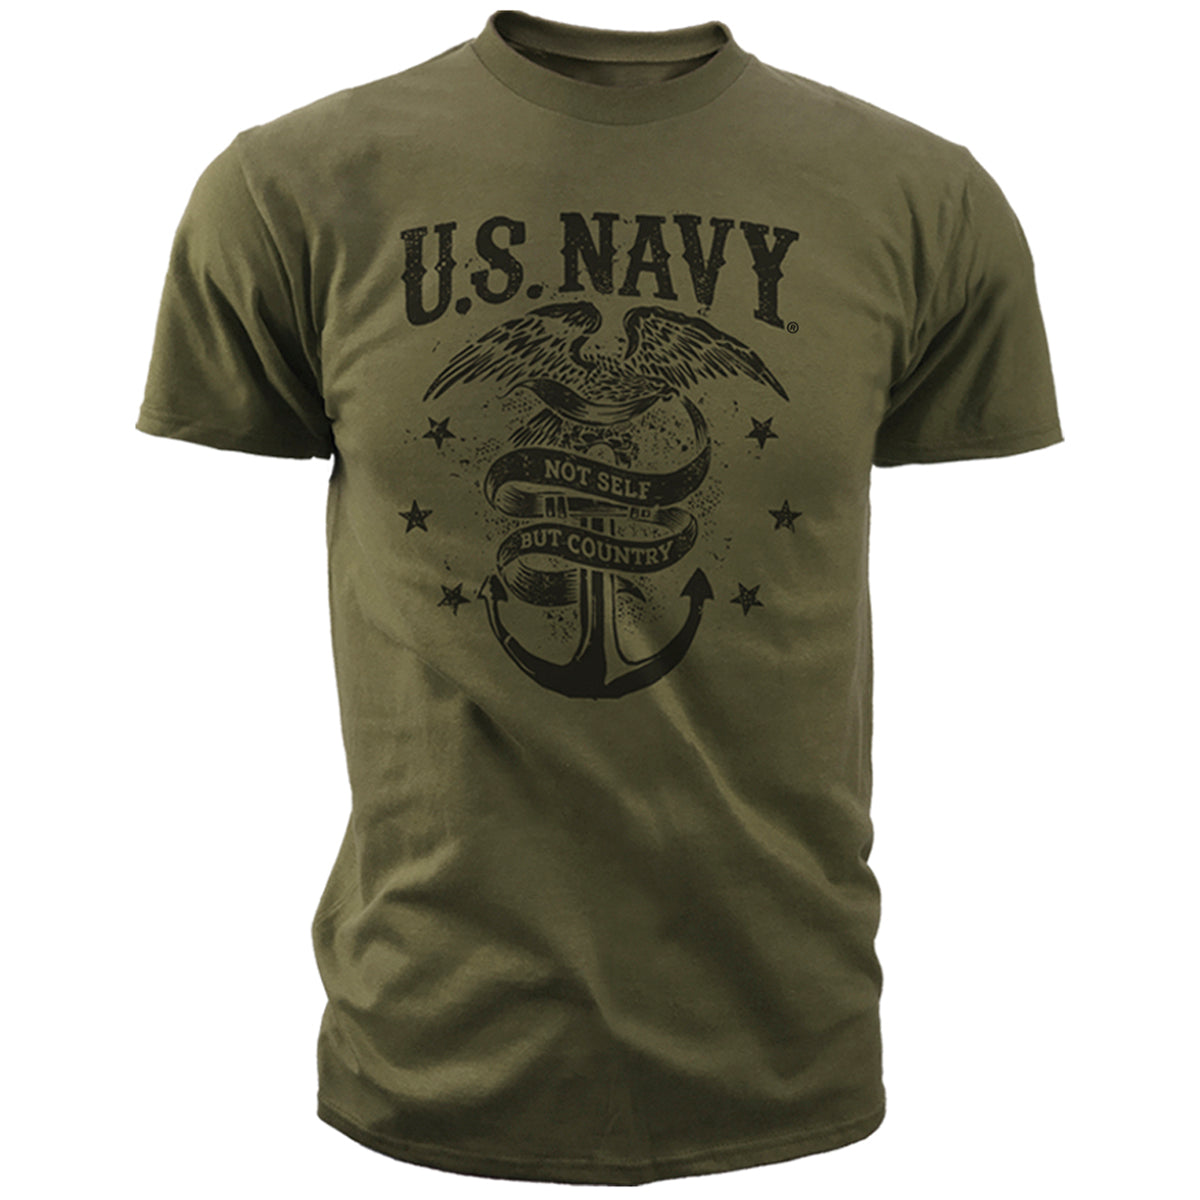 US T-Shirts - Mens US Navy Not Self But Country - Navy T-Shirt 7.62 Design